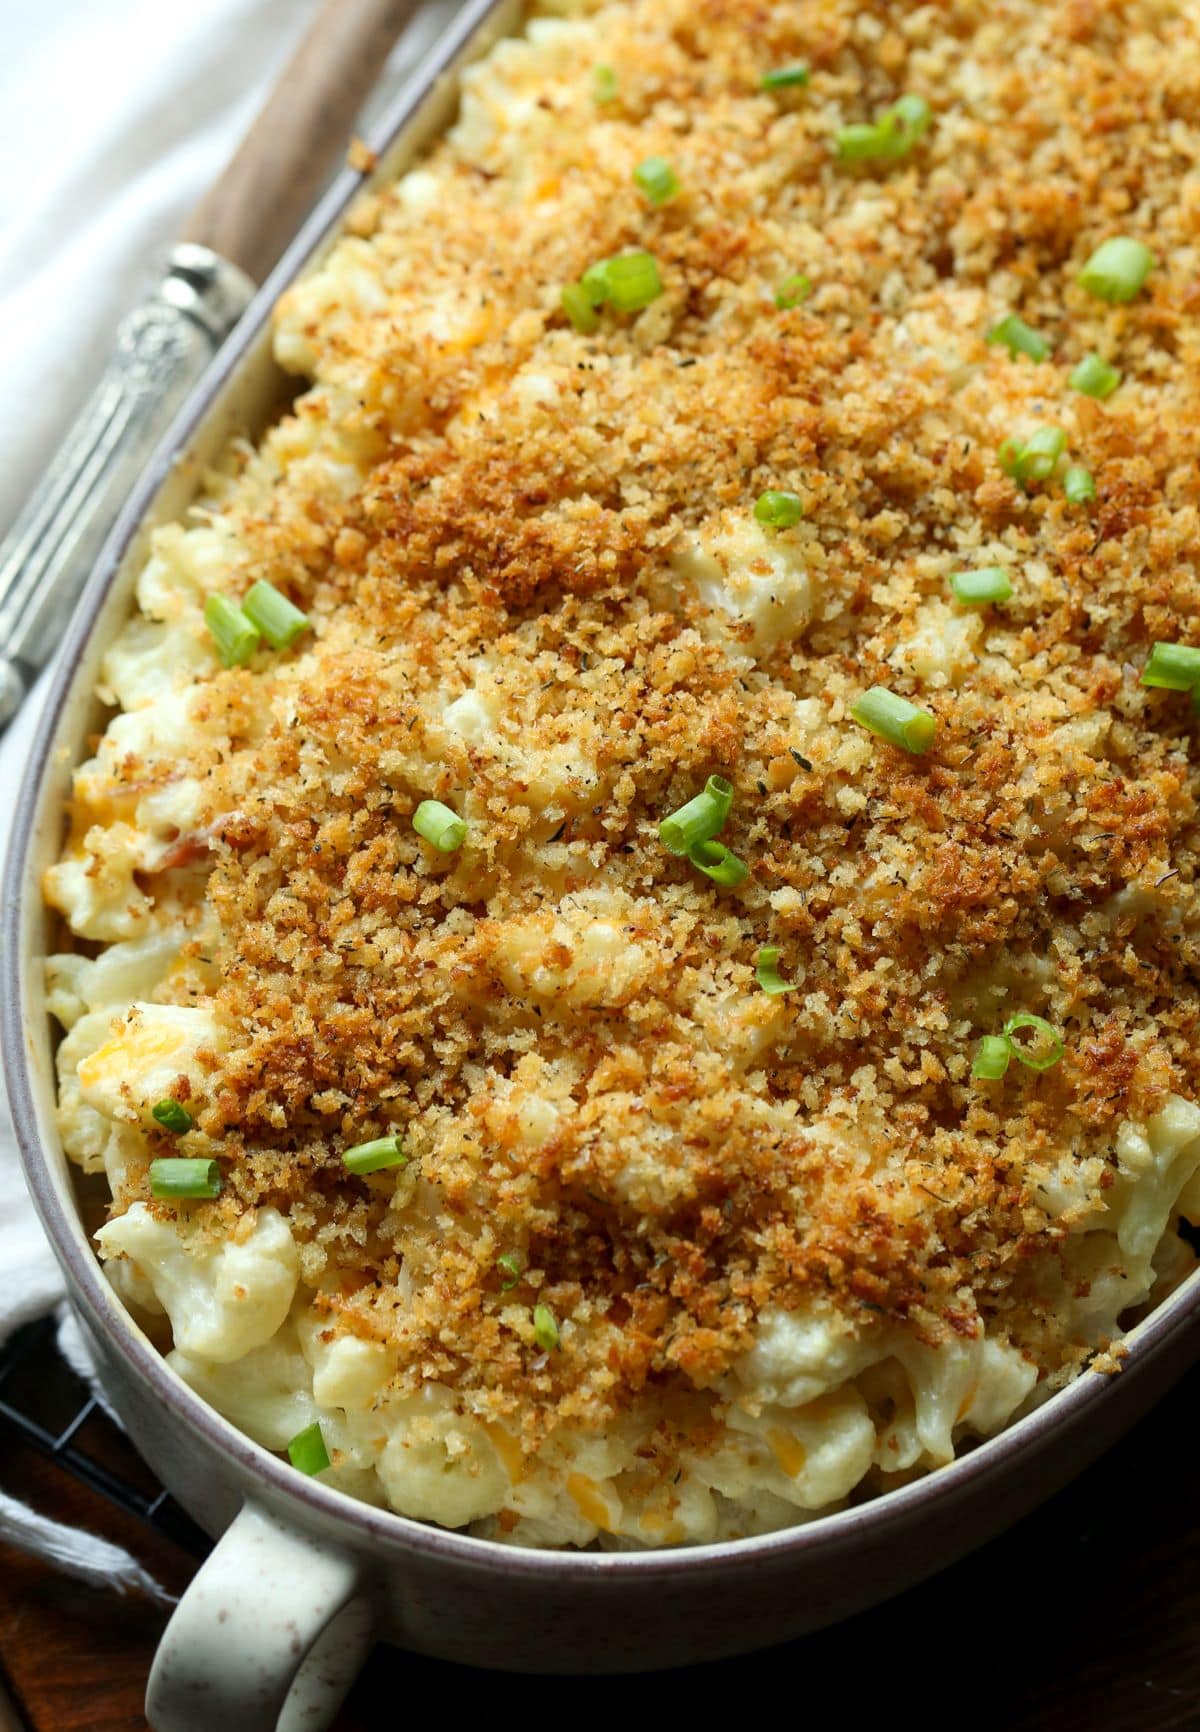 A baked cauliflower casserole topped with breadcrumbs and garnished with green onions.